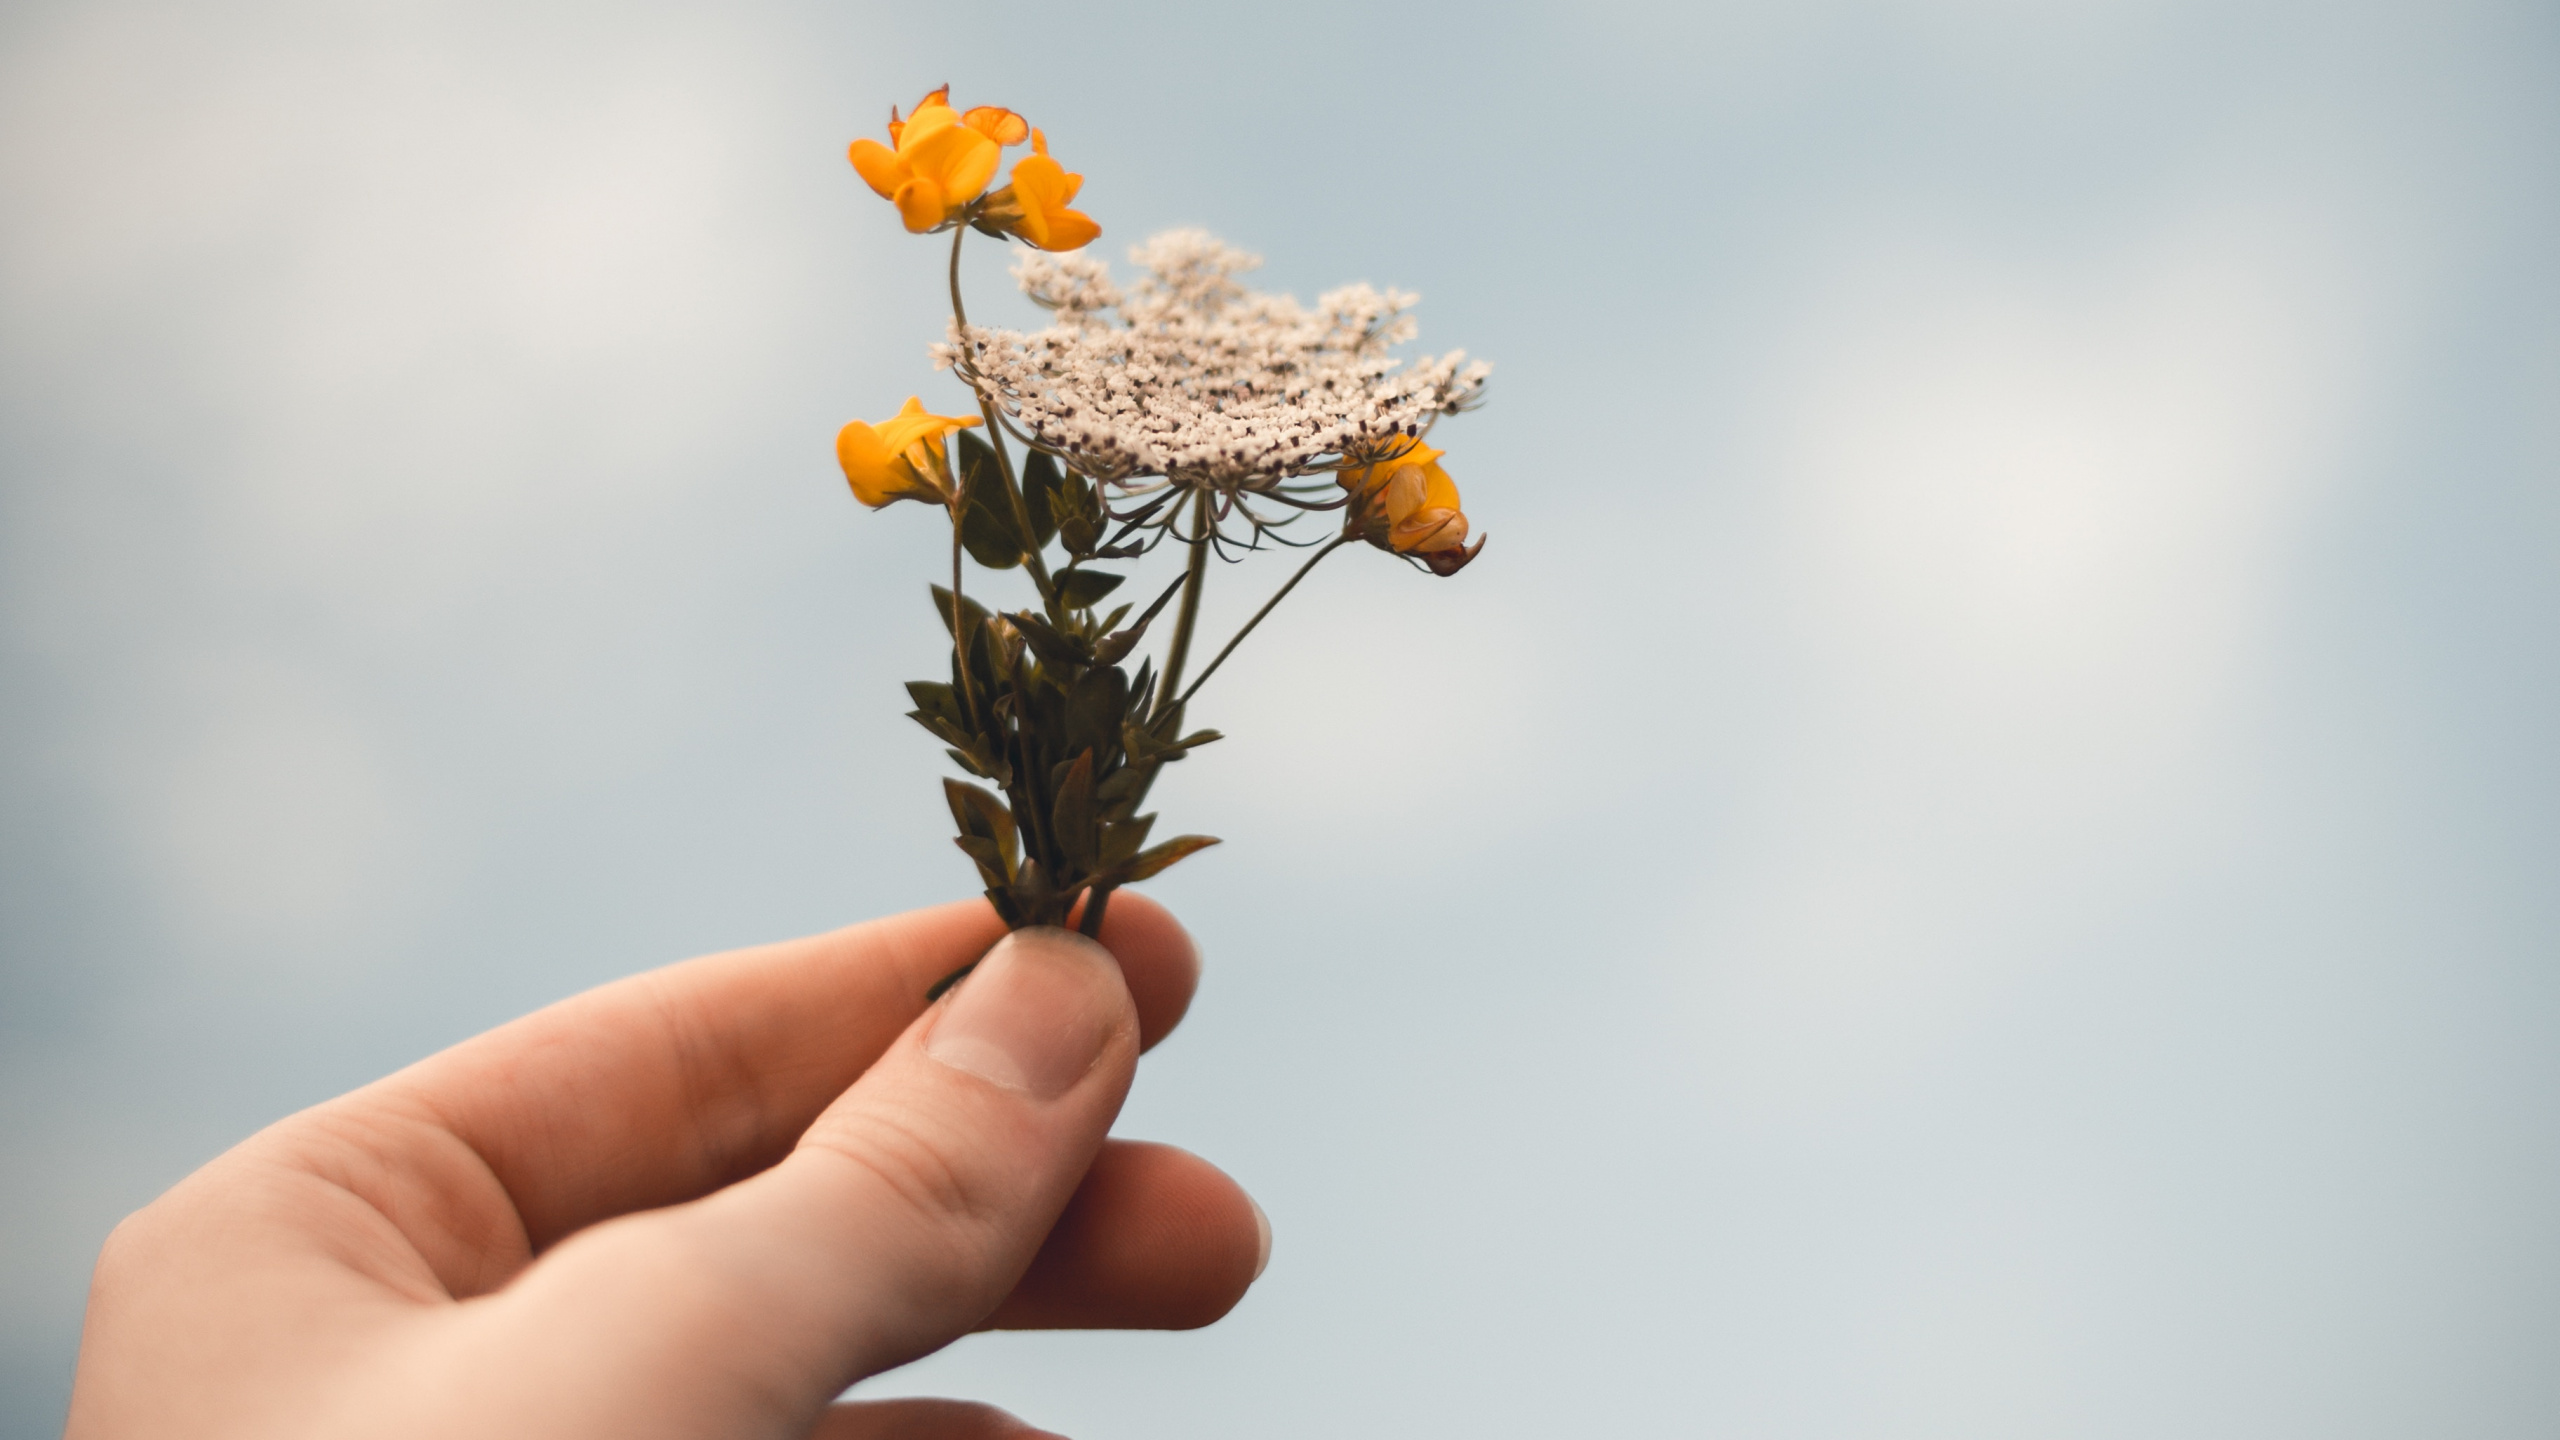 Person Holding Yellow and Brown Flower. Wallpaper in 2560x1440 Resolution